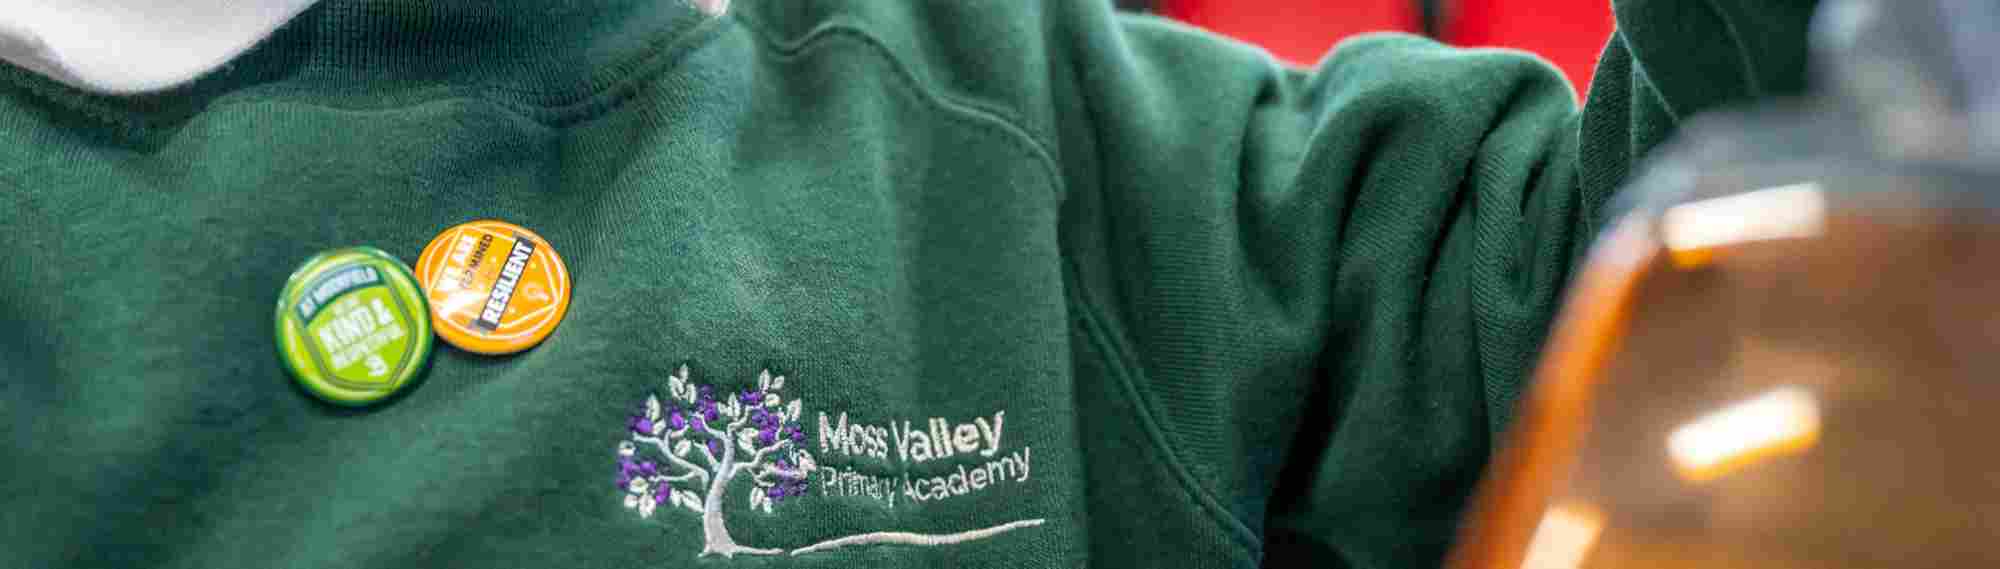 Moss Valley school jumper close up with achievement badges